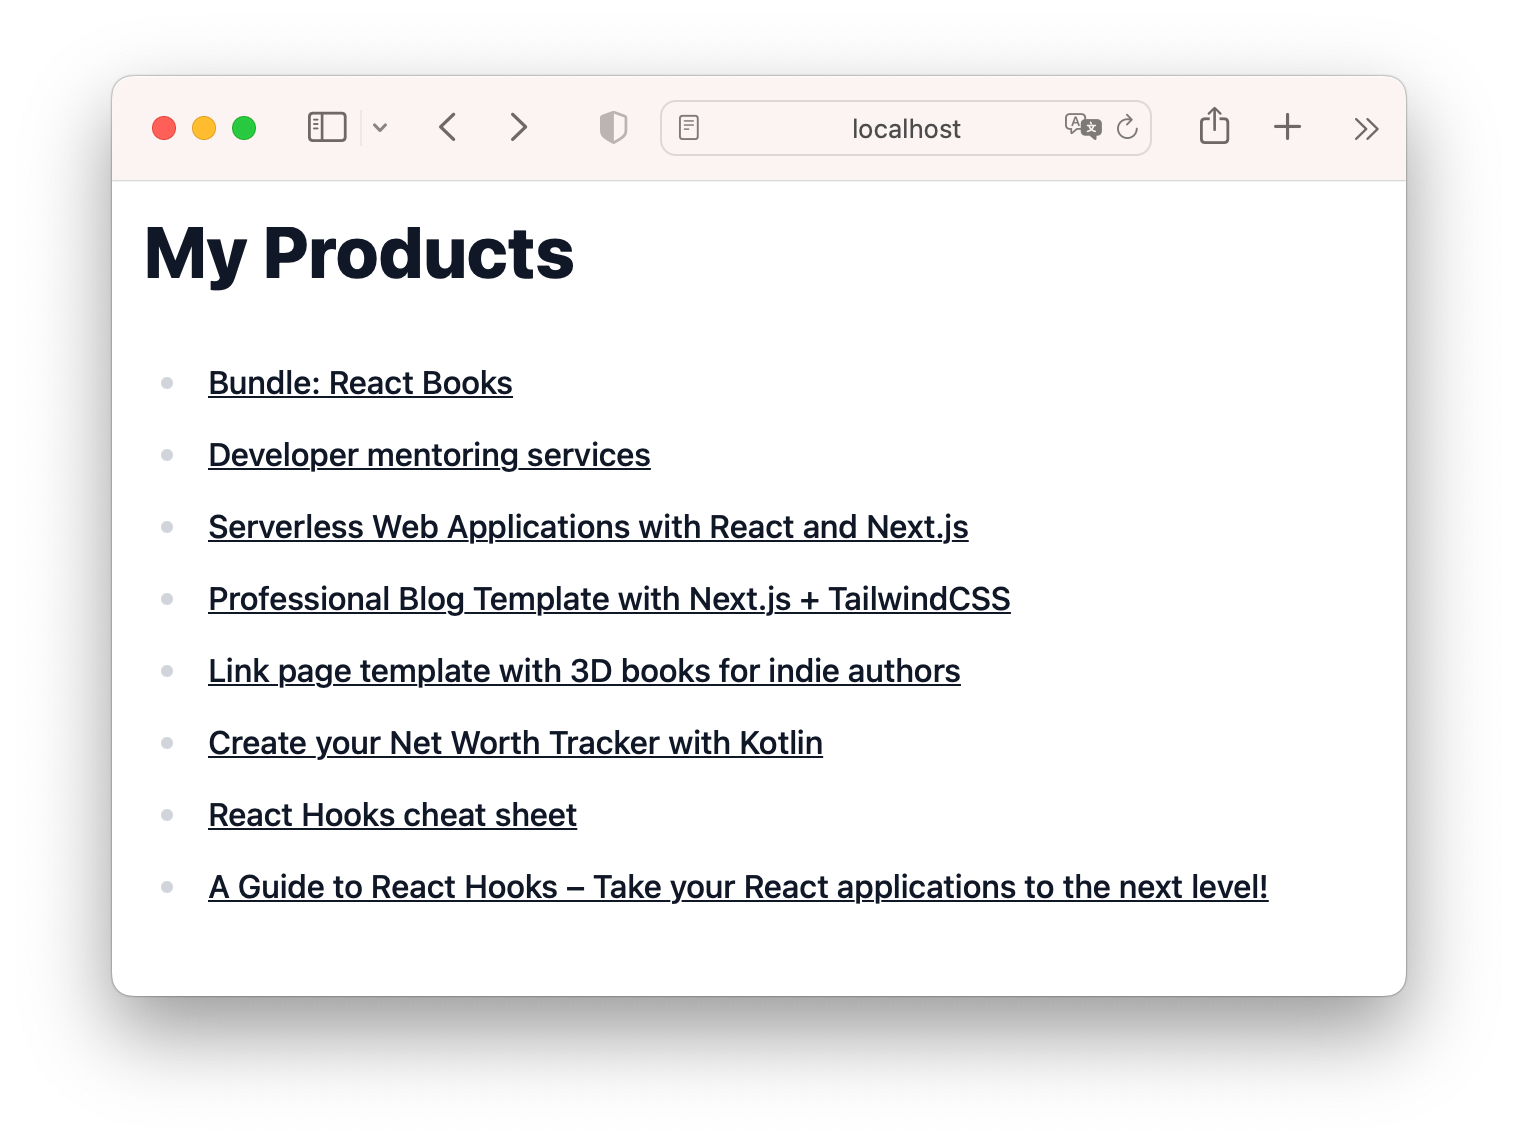 The product list page